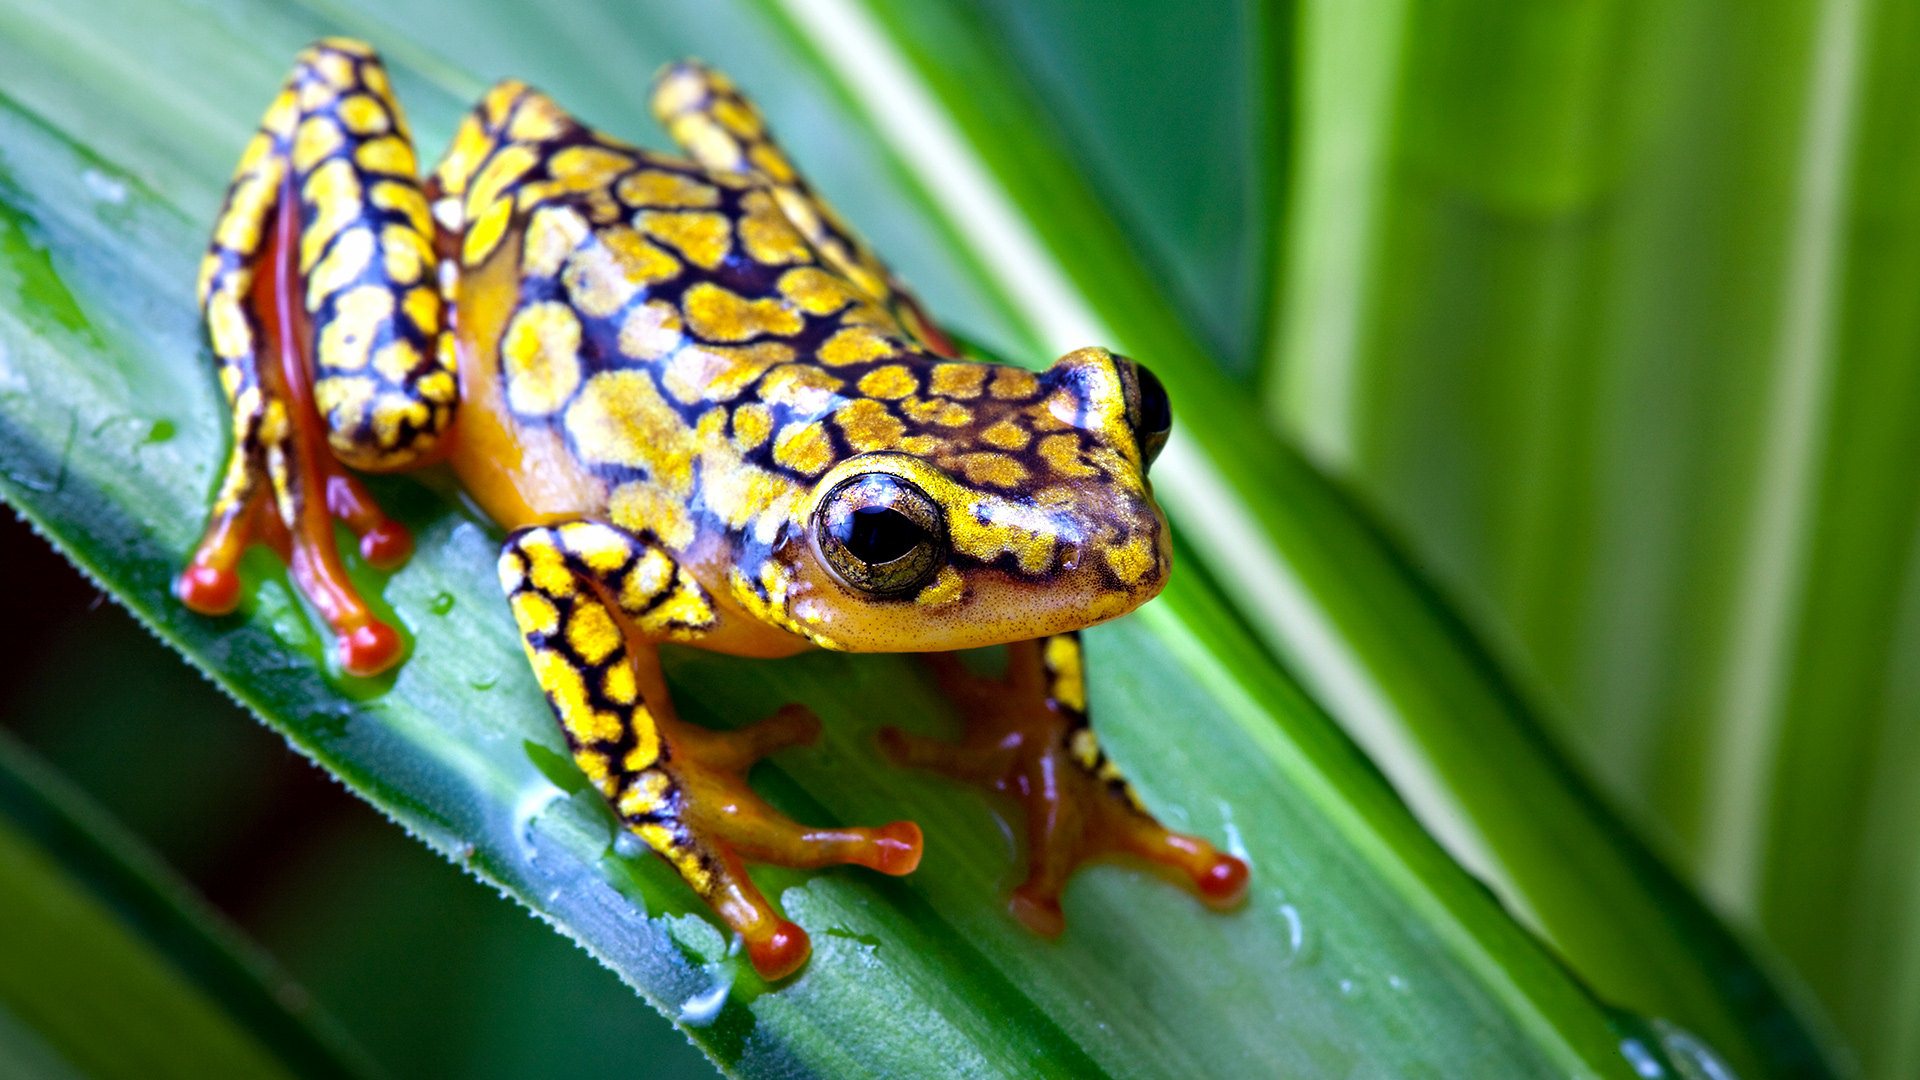 Frog on Leaf HD Wallpapers 1920x1080